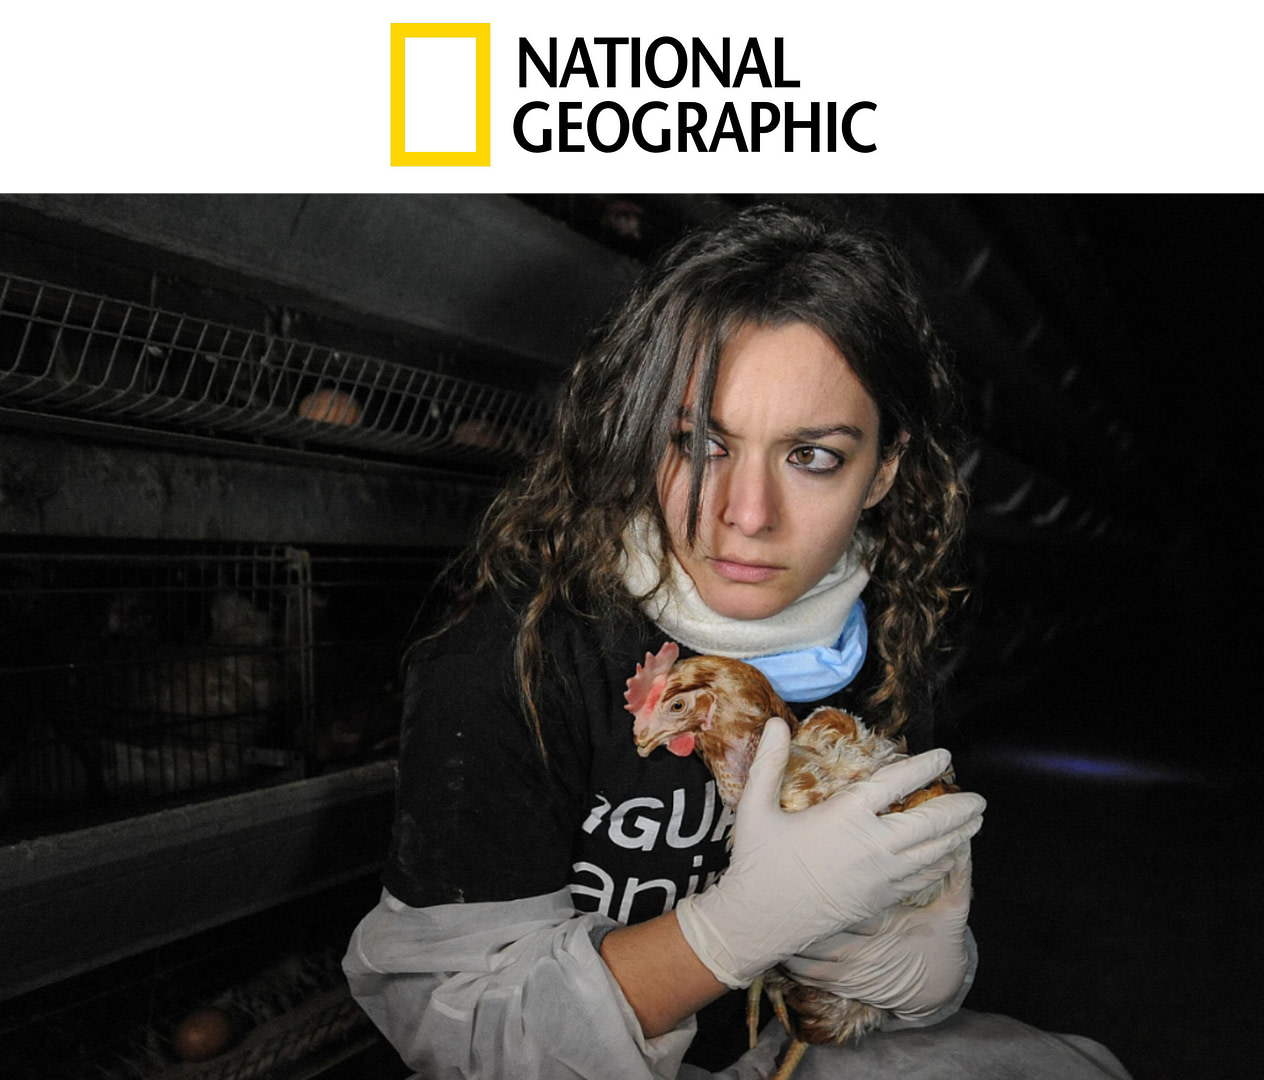 National Geographic<br />
